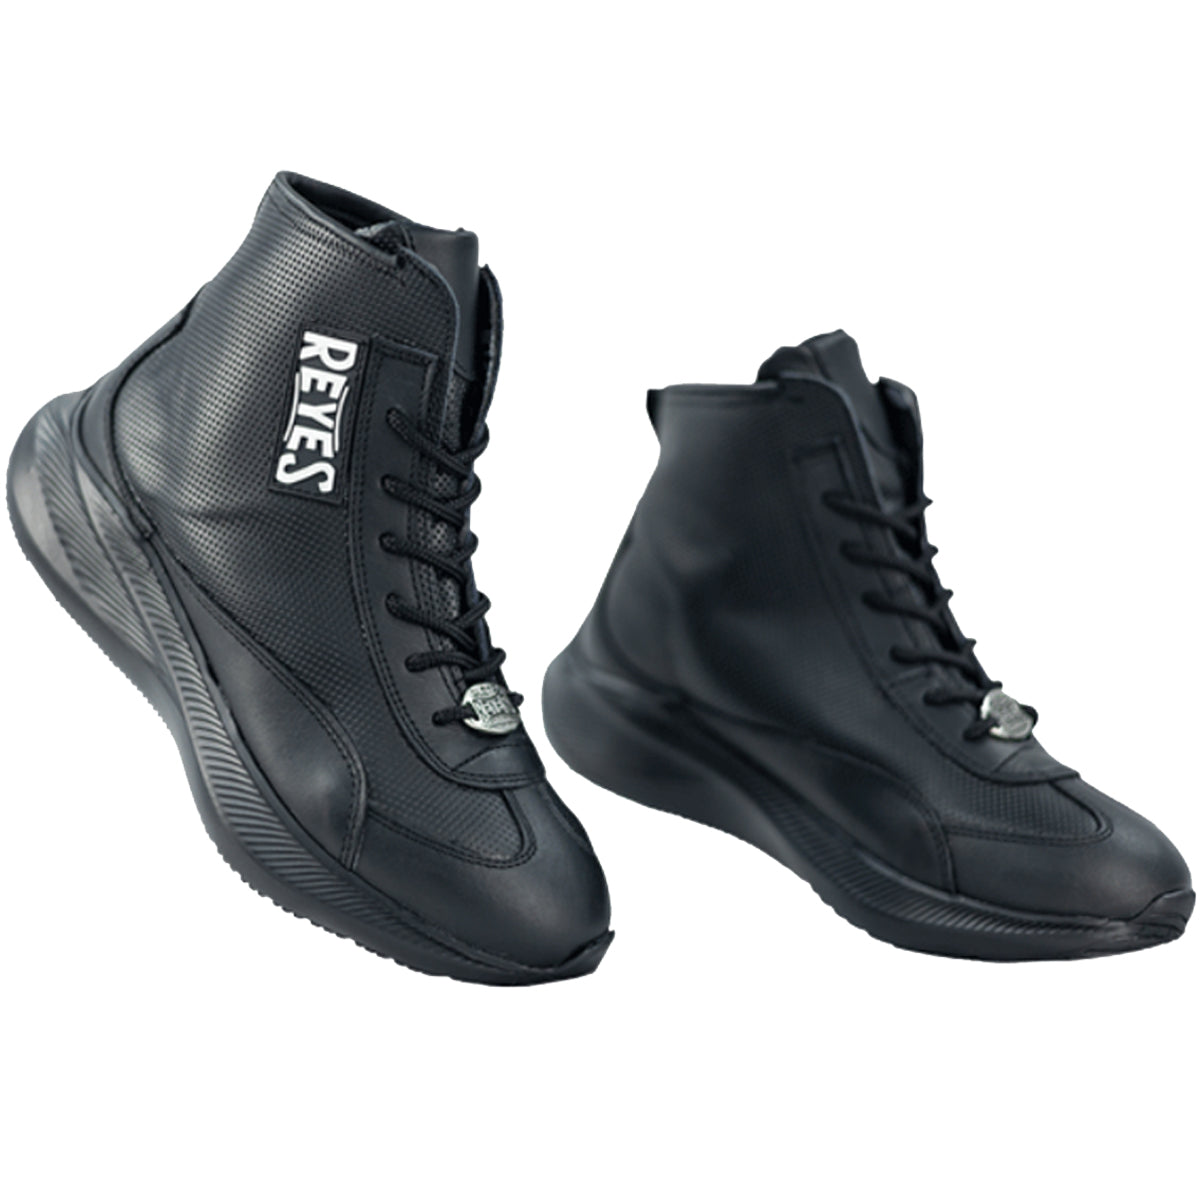 Cleto Reyes Mid Cut Leather Boxing Shoes - Black Cleto Reyes